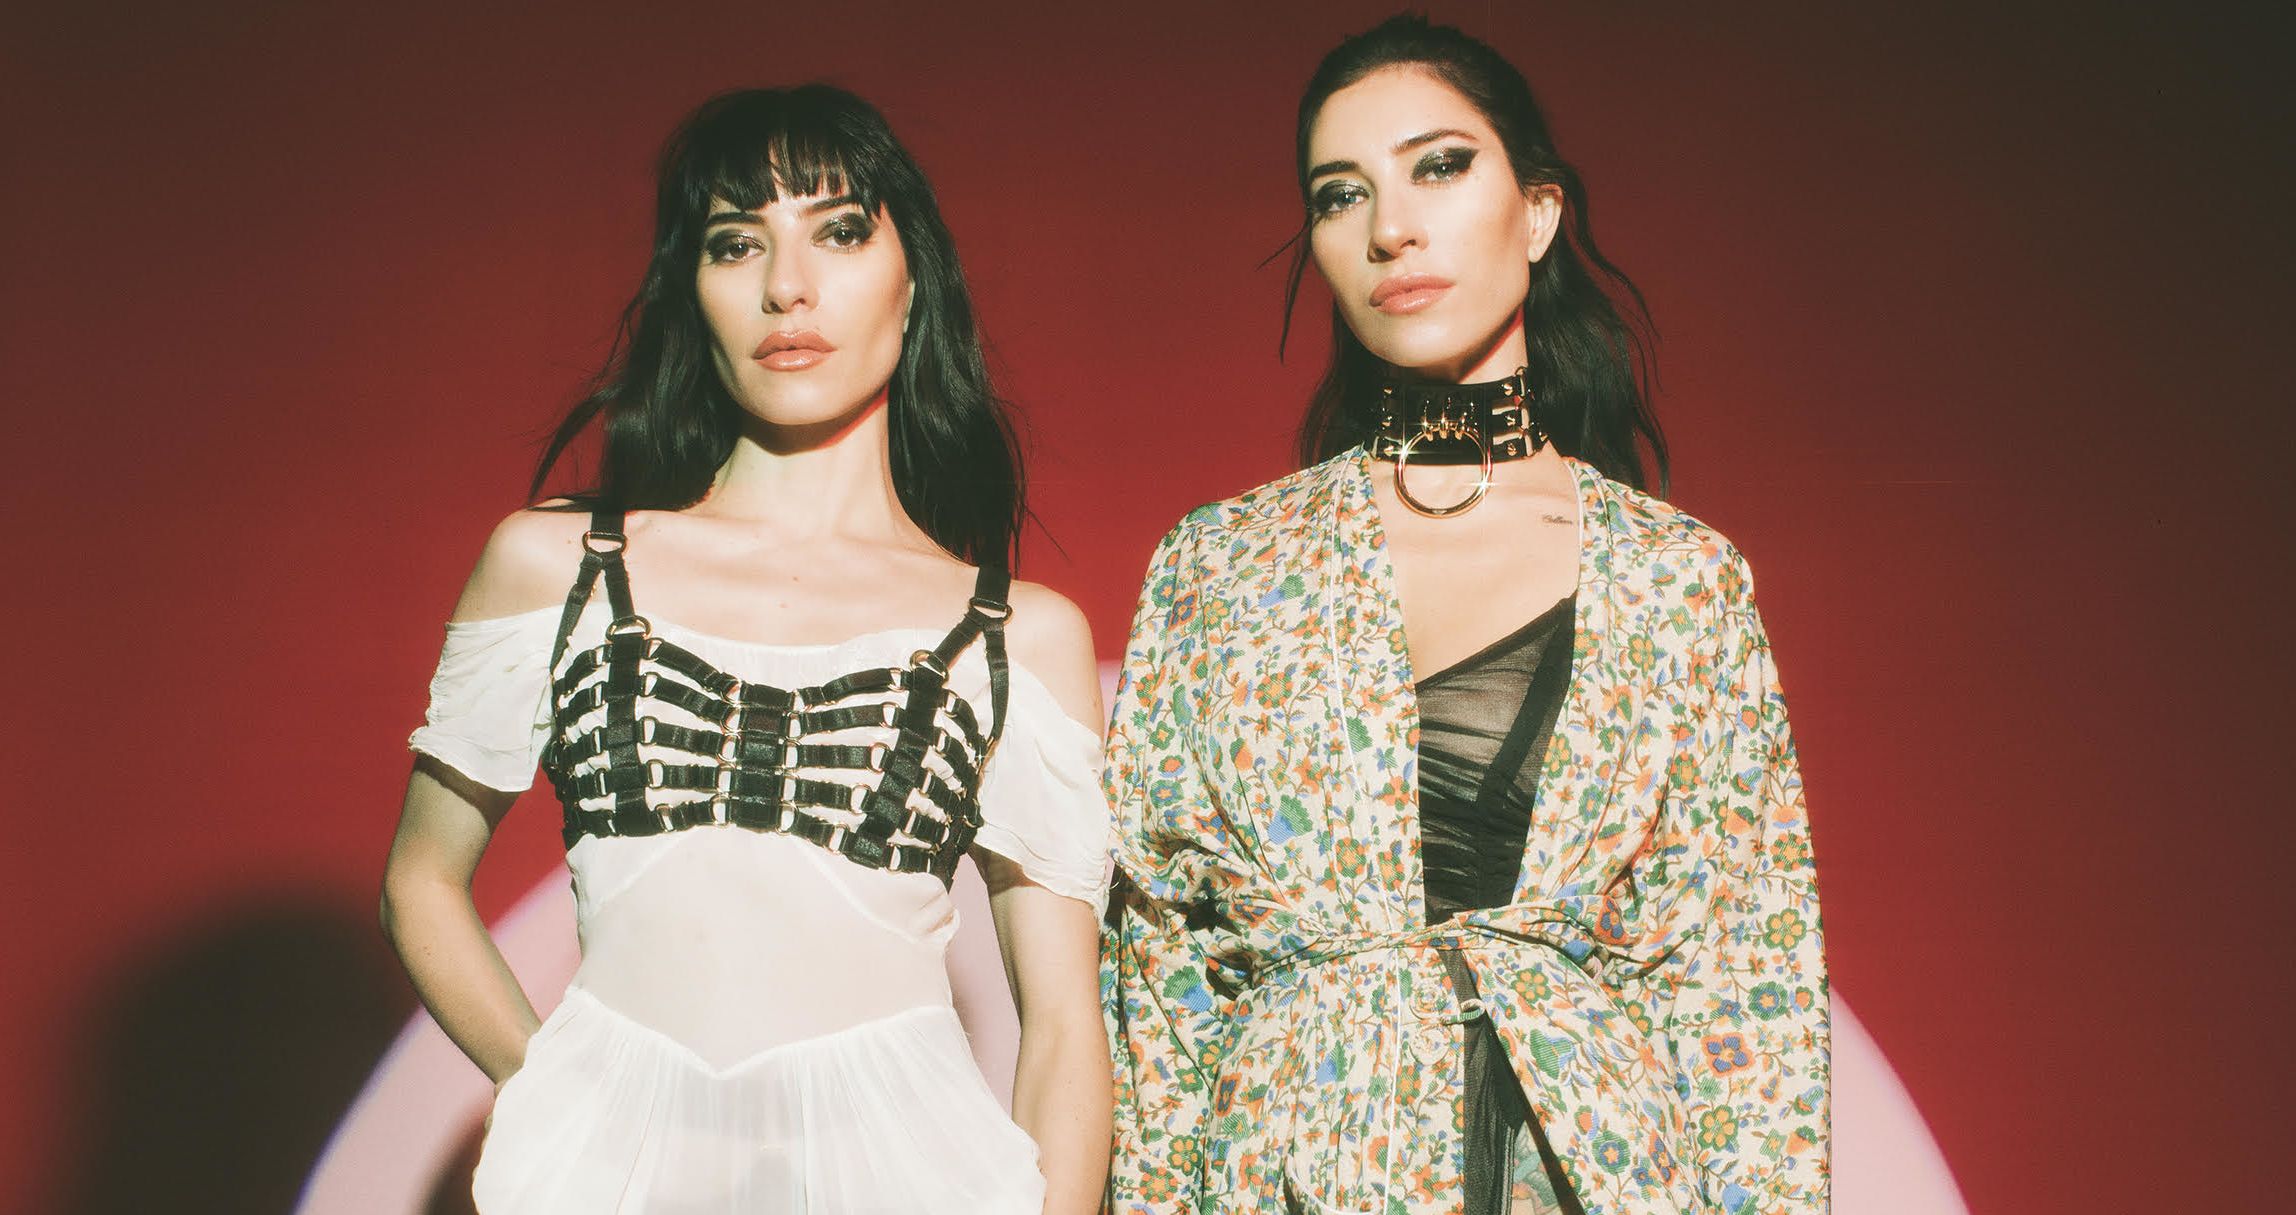 The Veronicas take control with their latest album